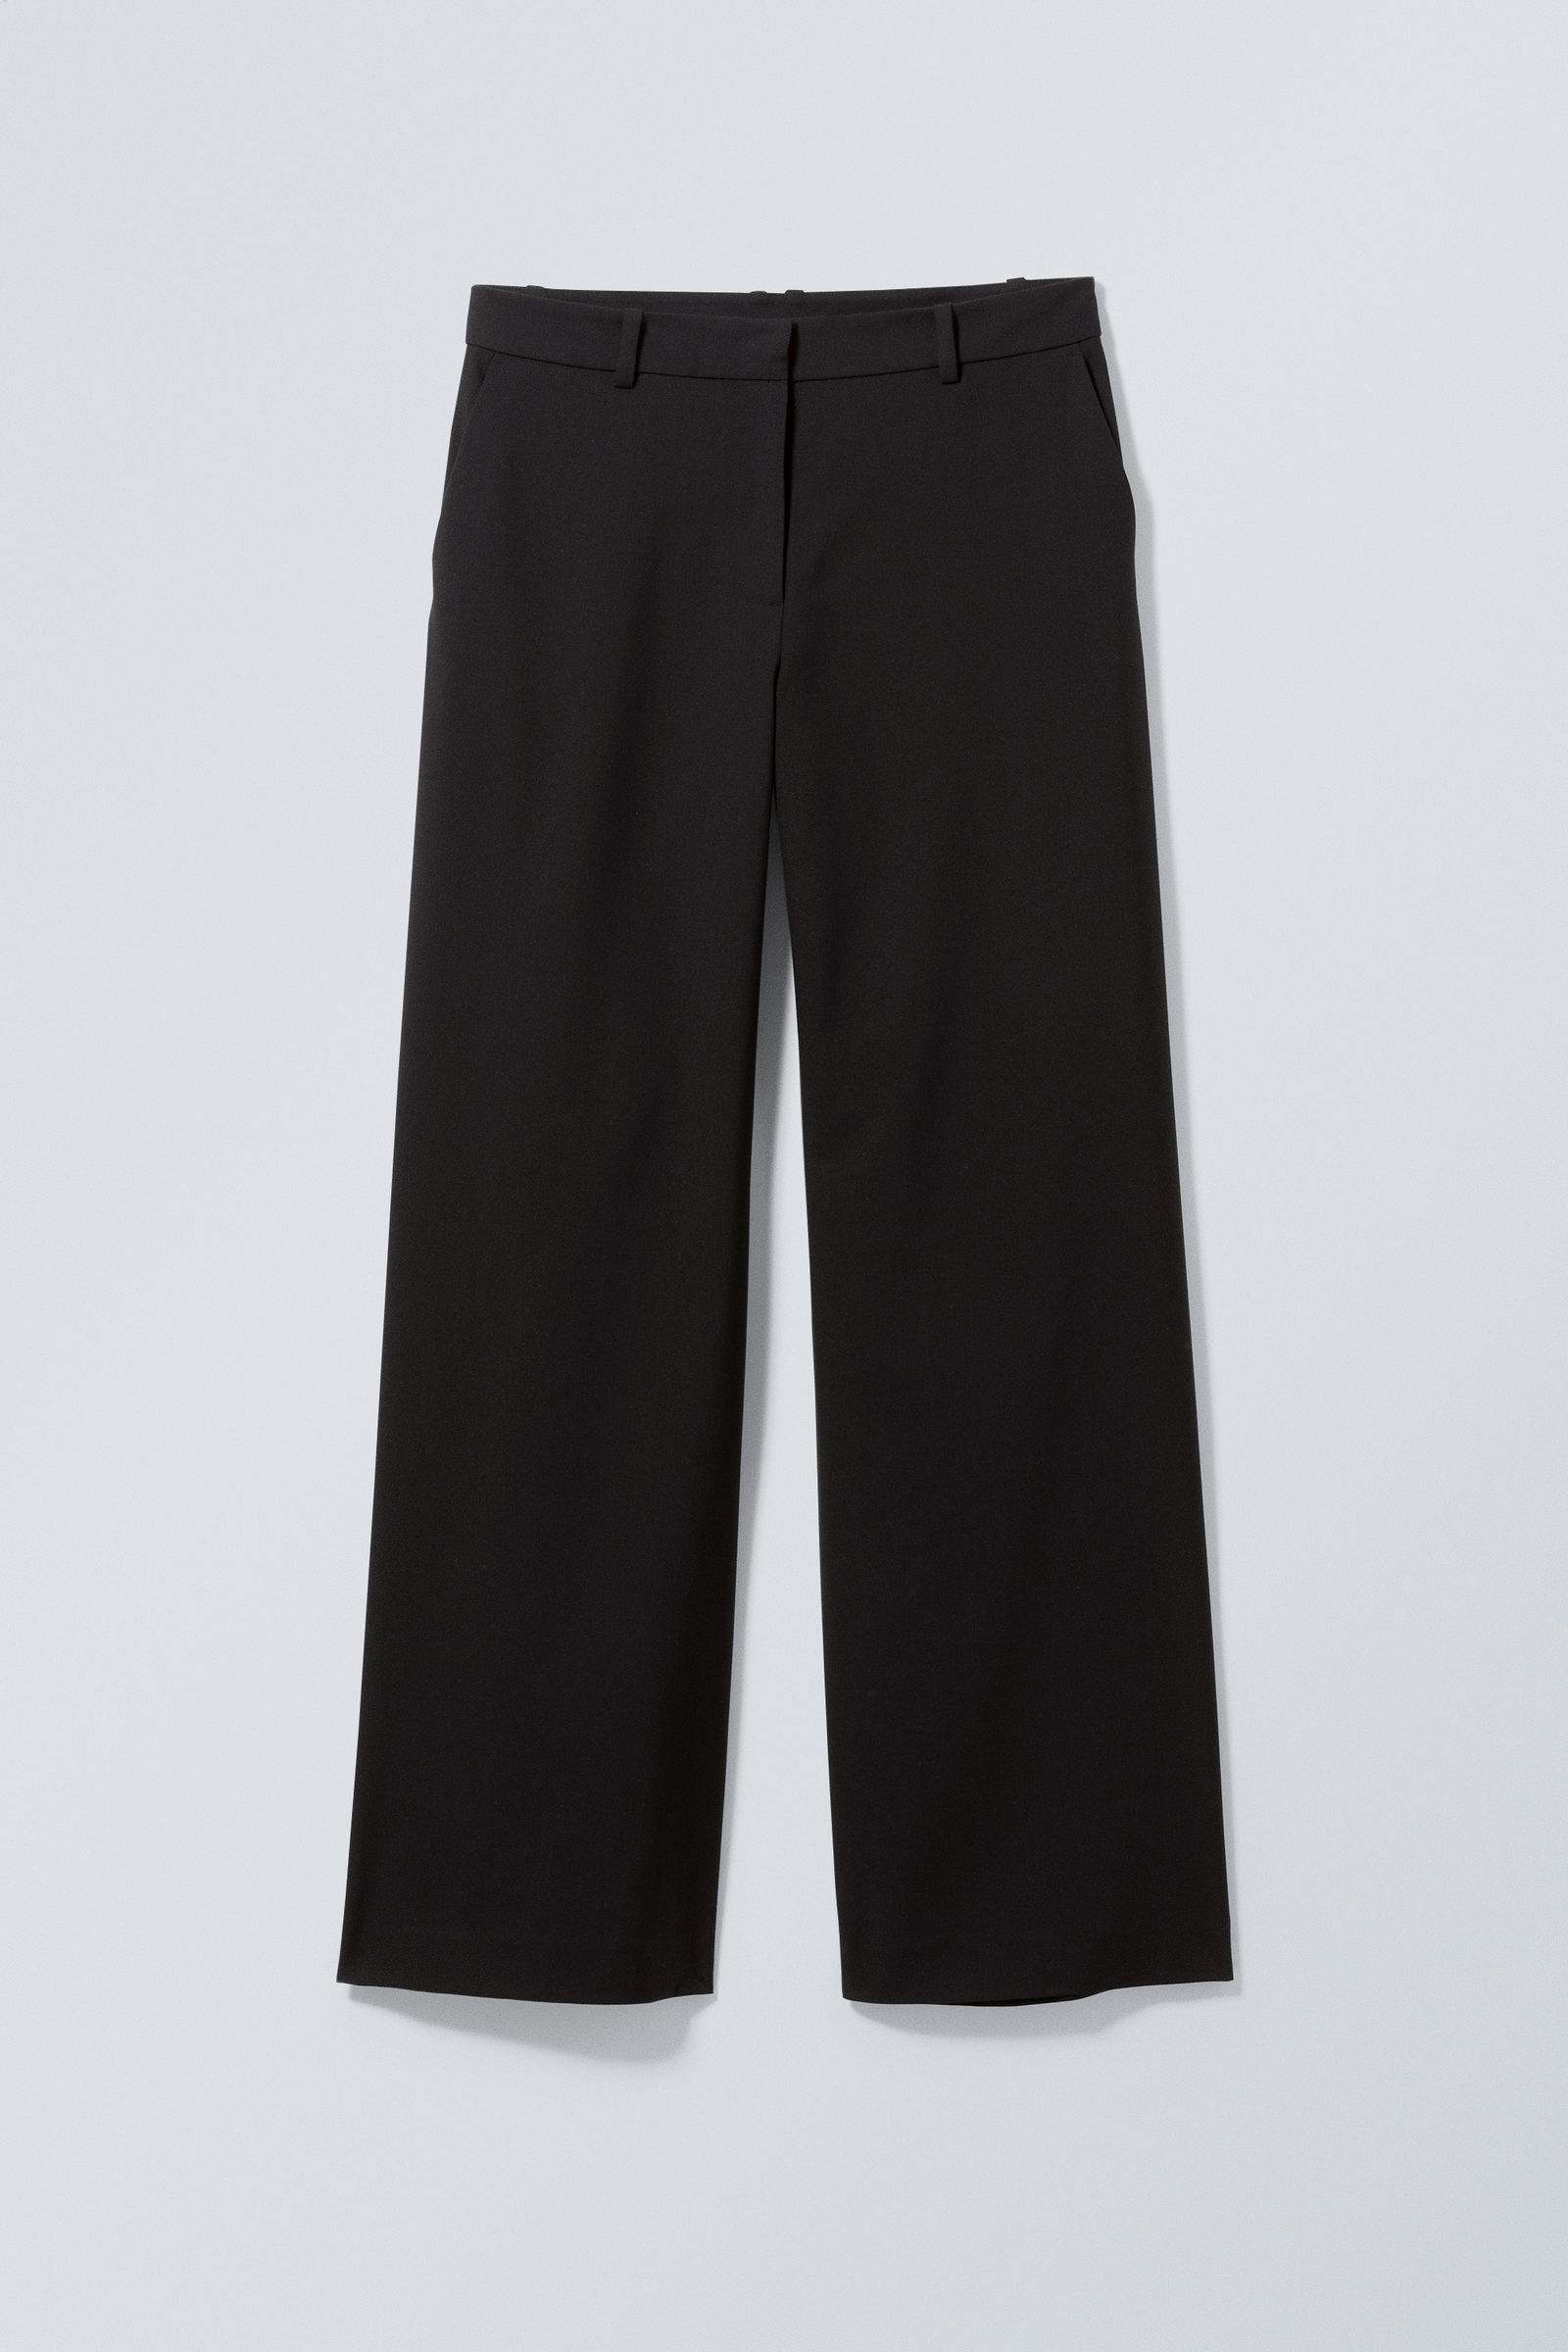 Black - Emily Low Waist Suiting Trousers - 0